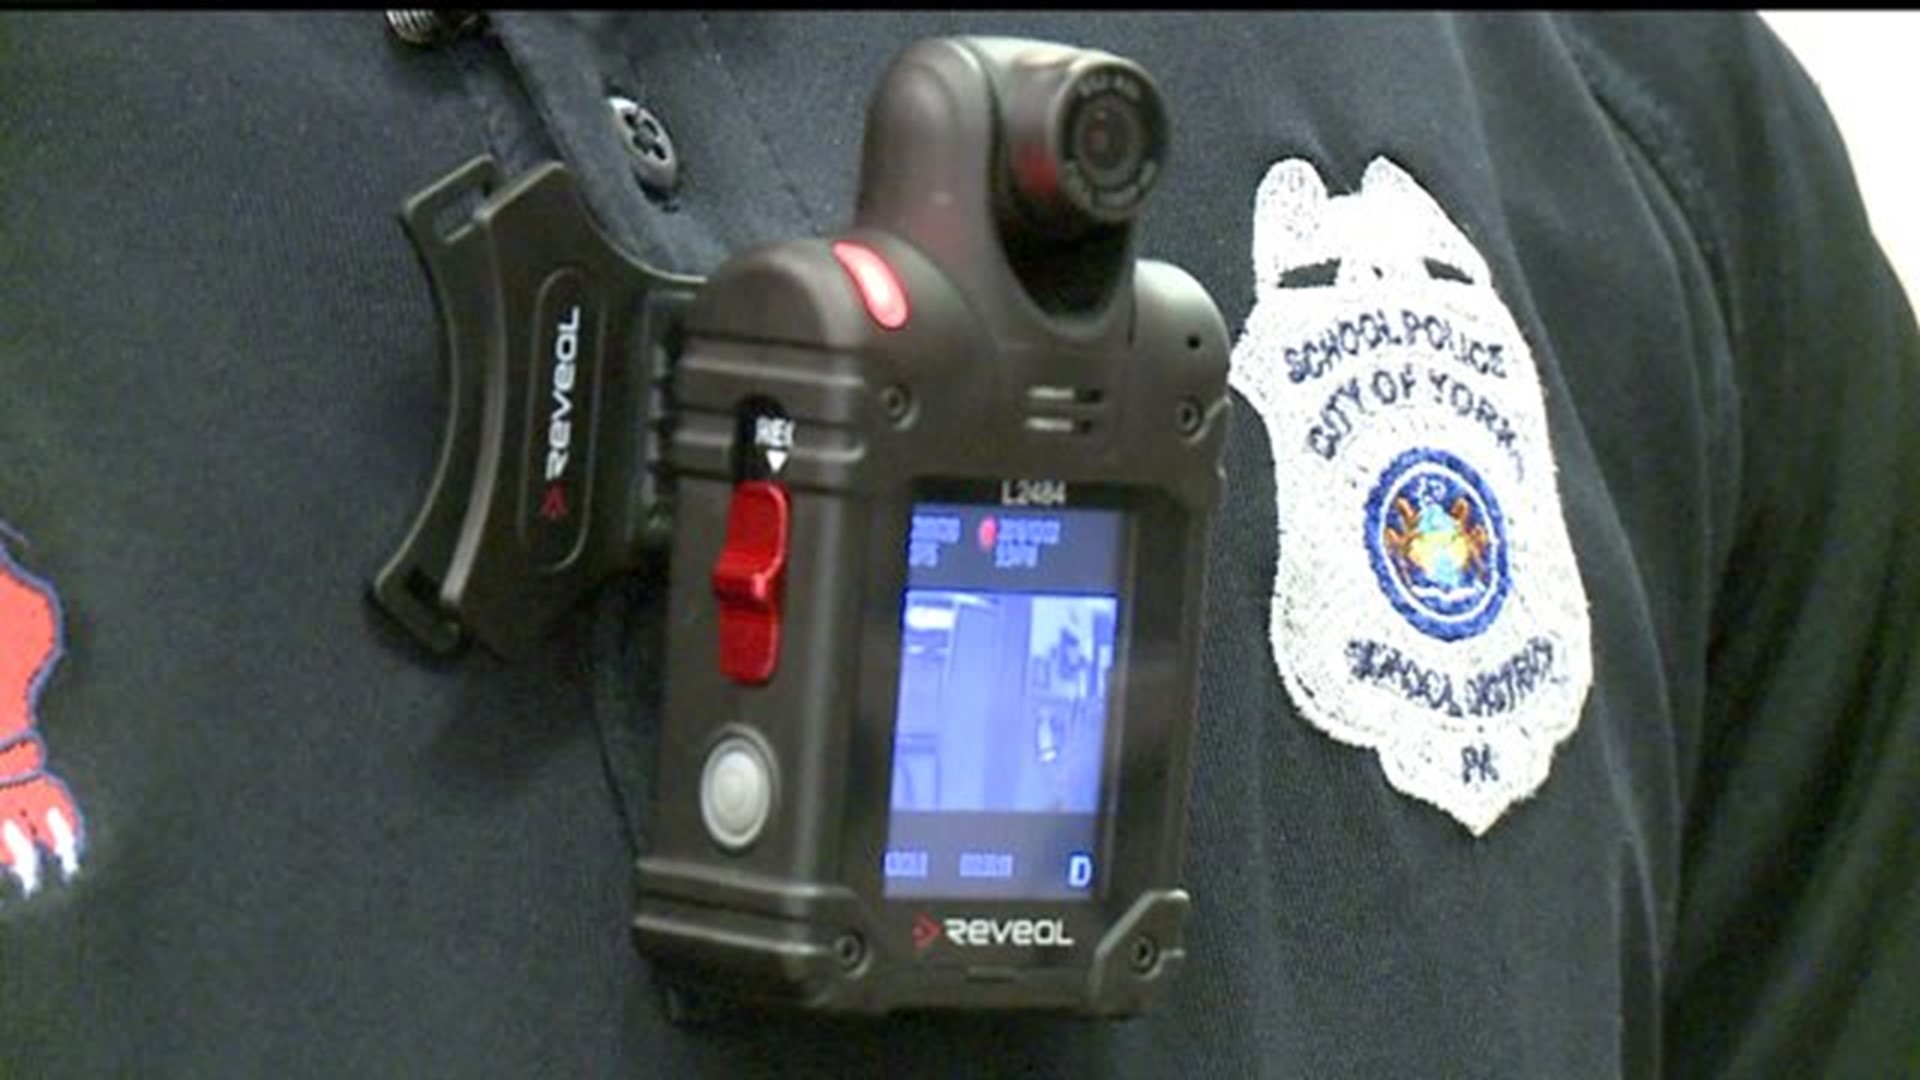 York City resource officers with body cameras